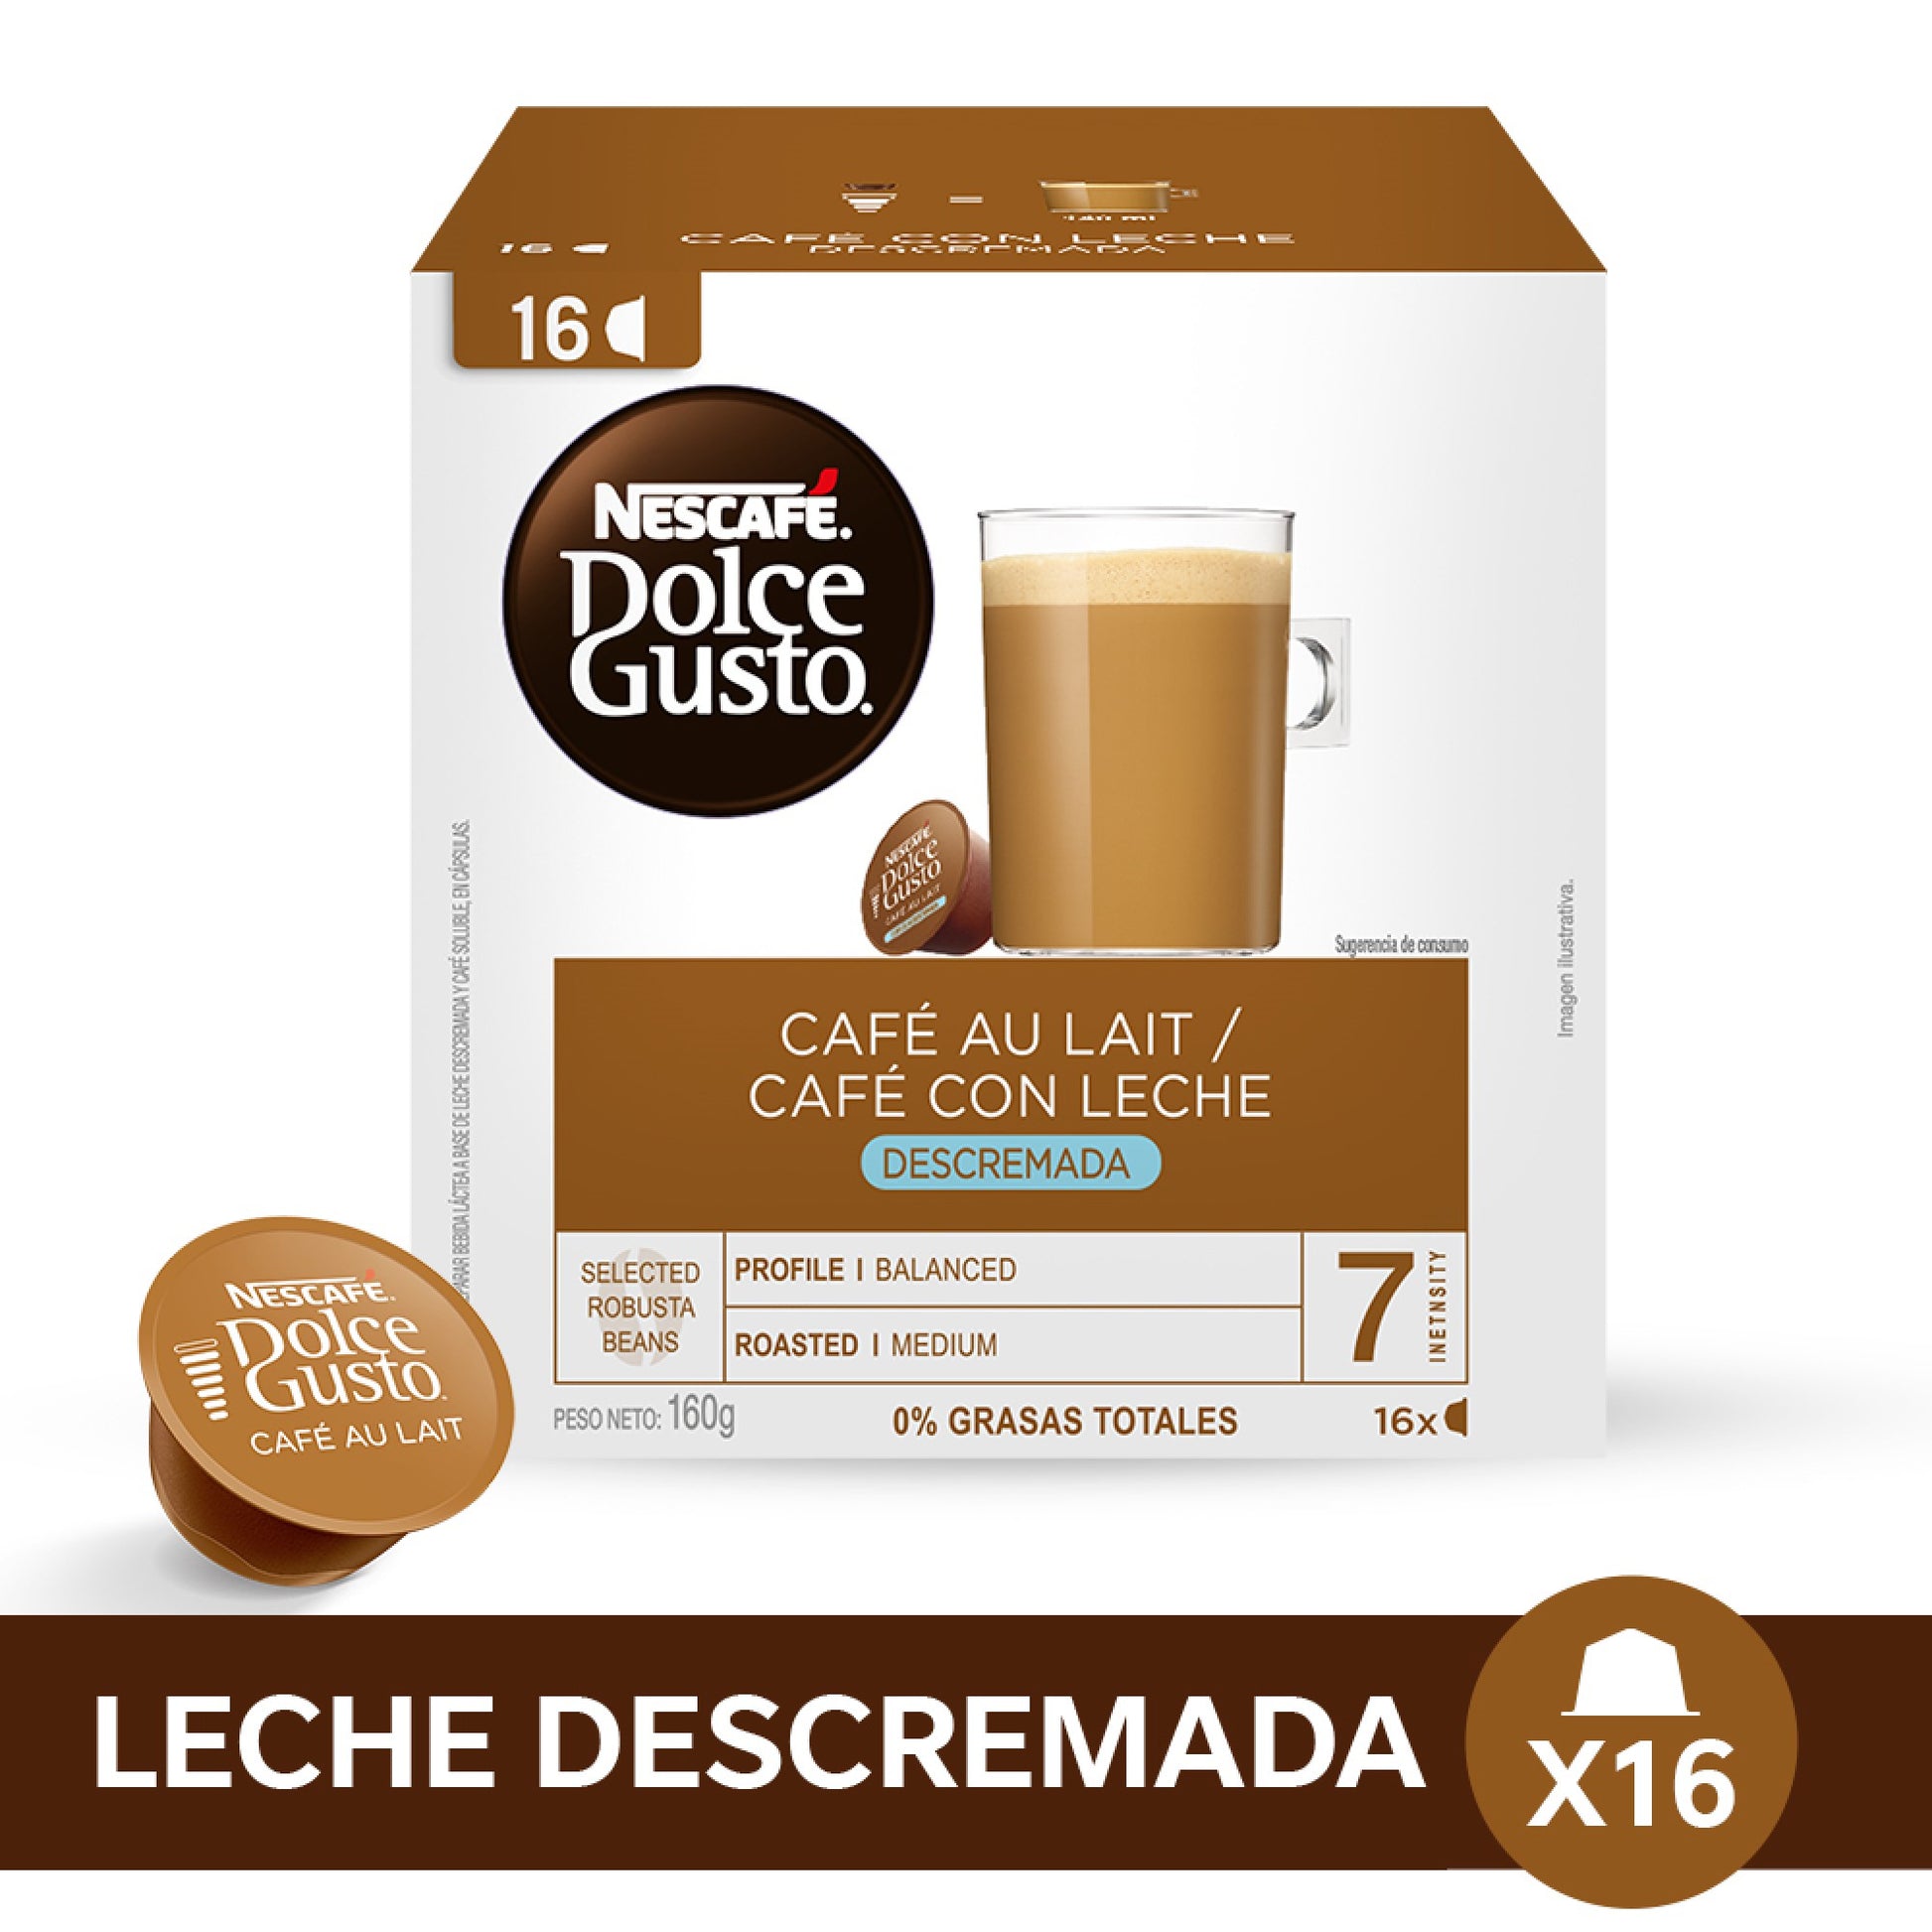 Dolce Gusto Cafe con leche